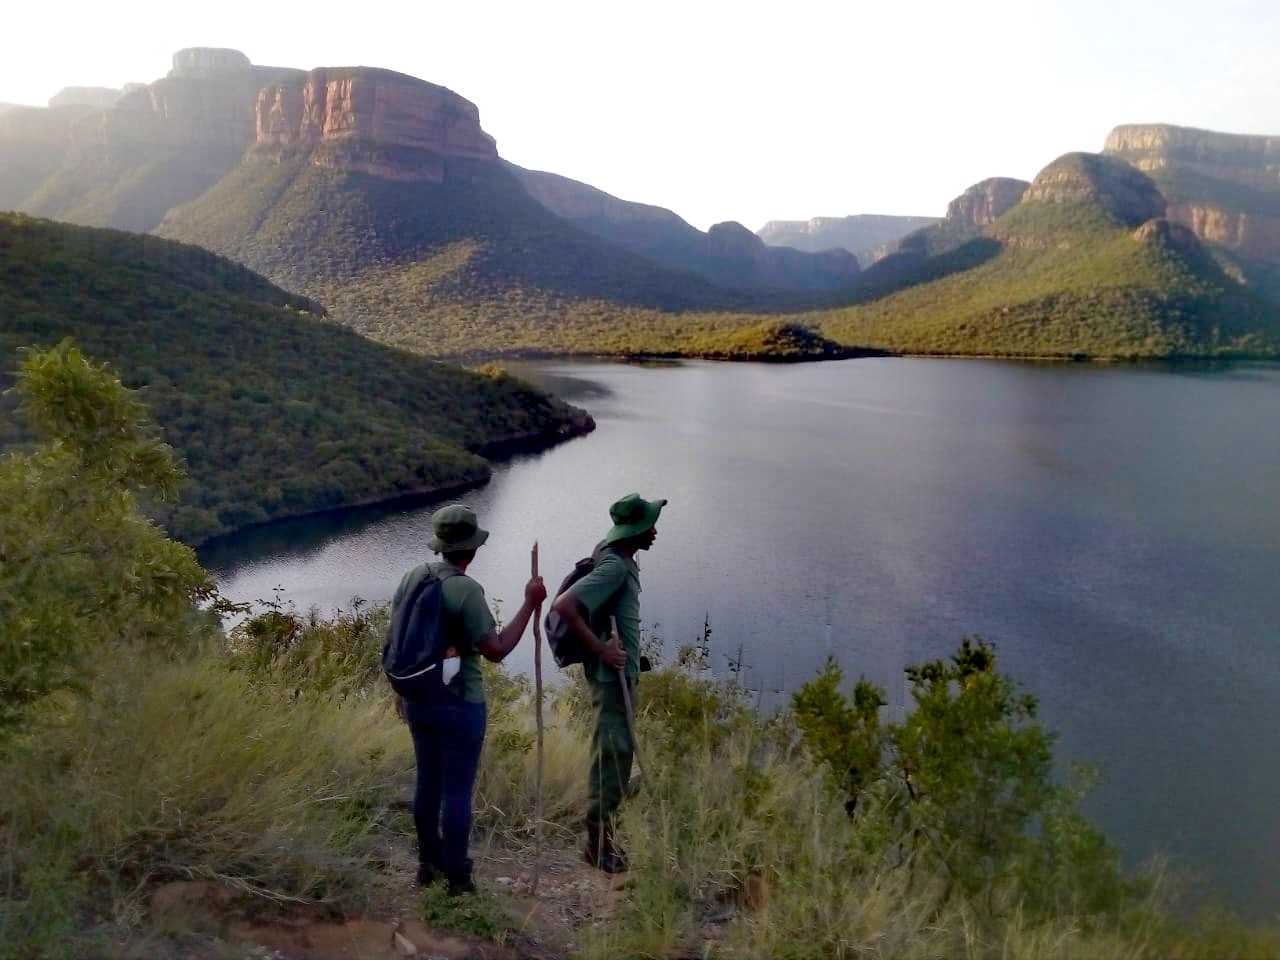 Resilient Waters protects and preserves biodiverse hotspots such as the Kruger to Canyons (K2C) Biosphere through support to community-based environmental monitors. Photo credit: Resilient Waters